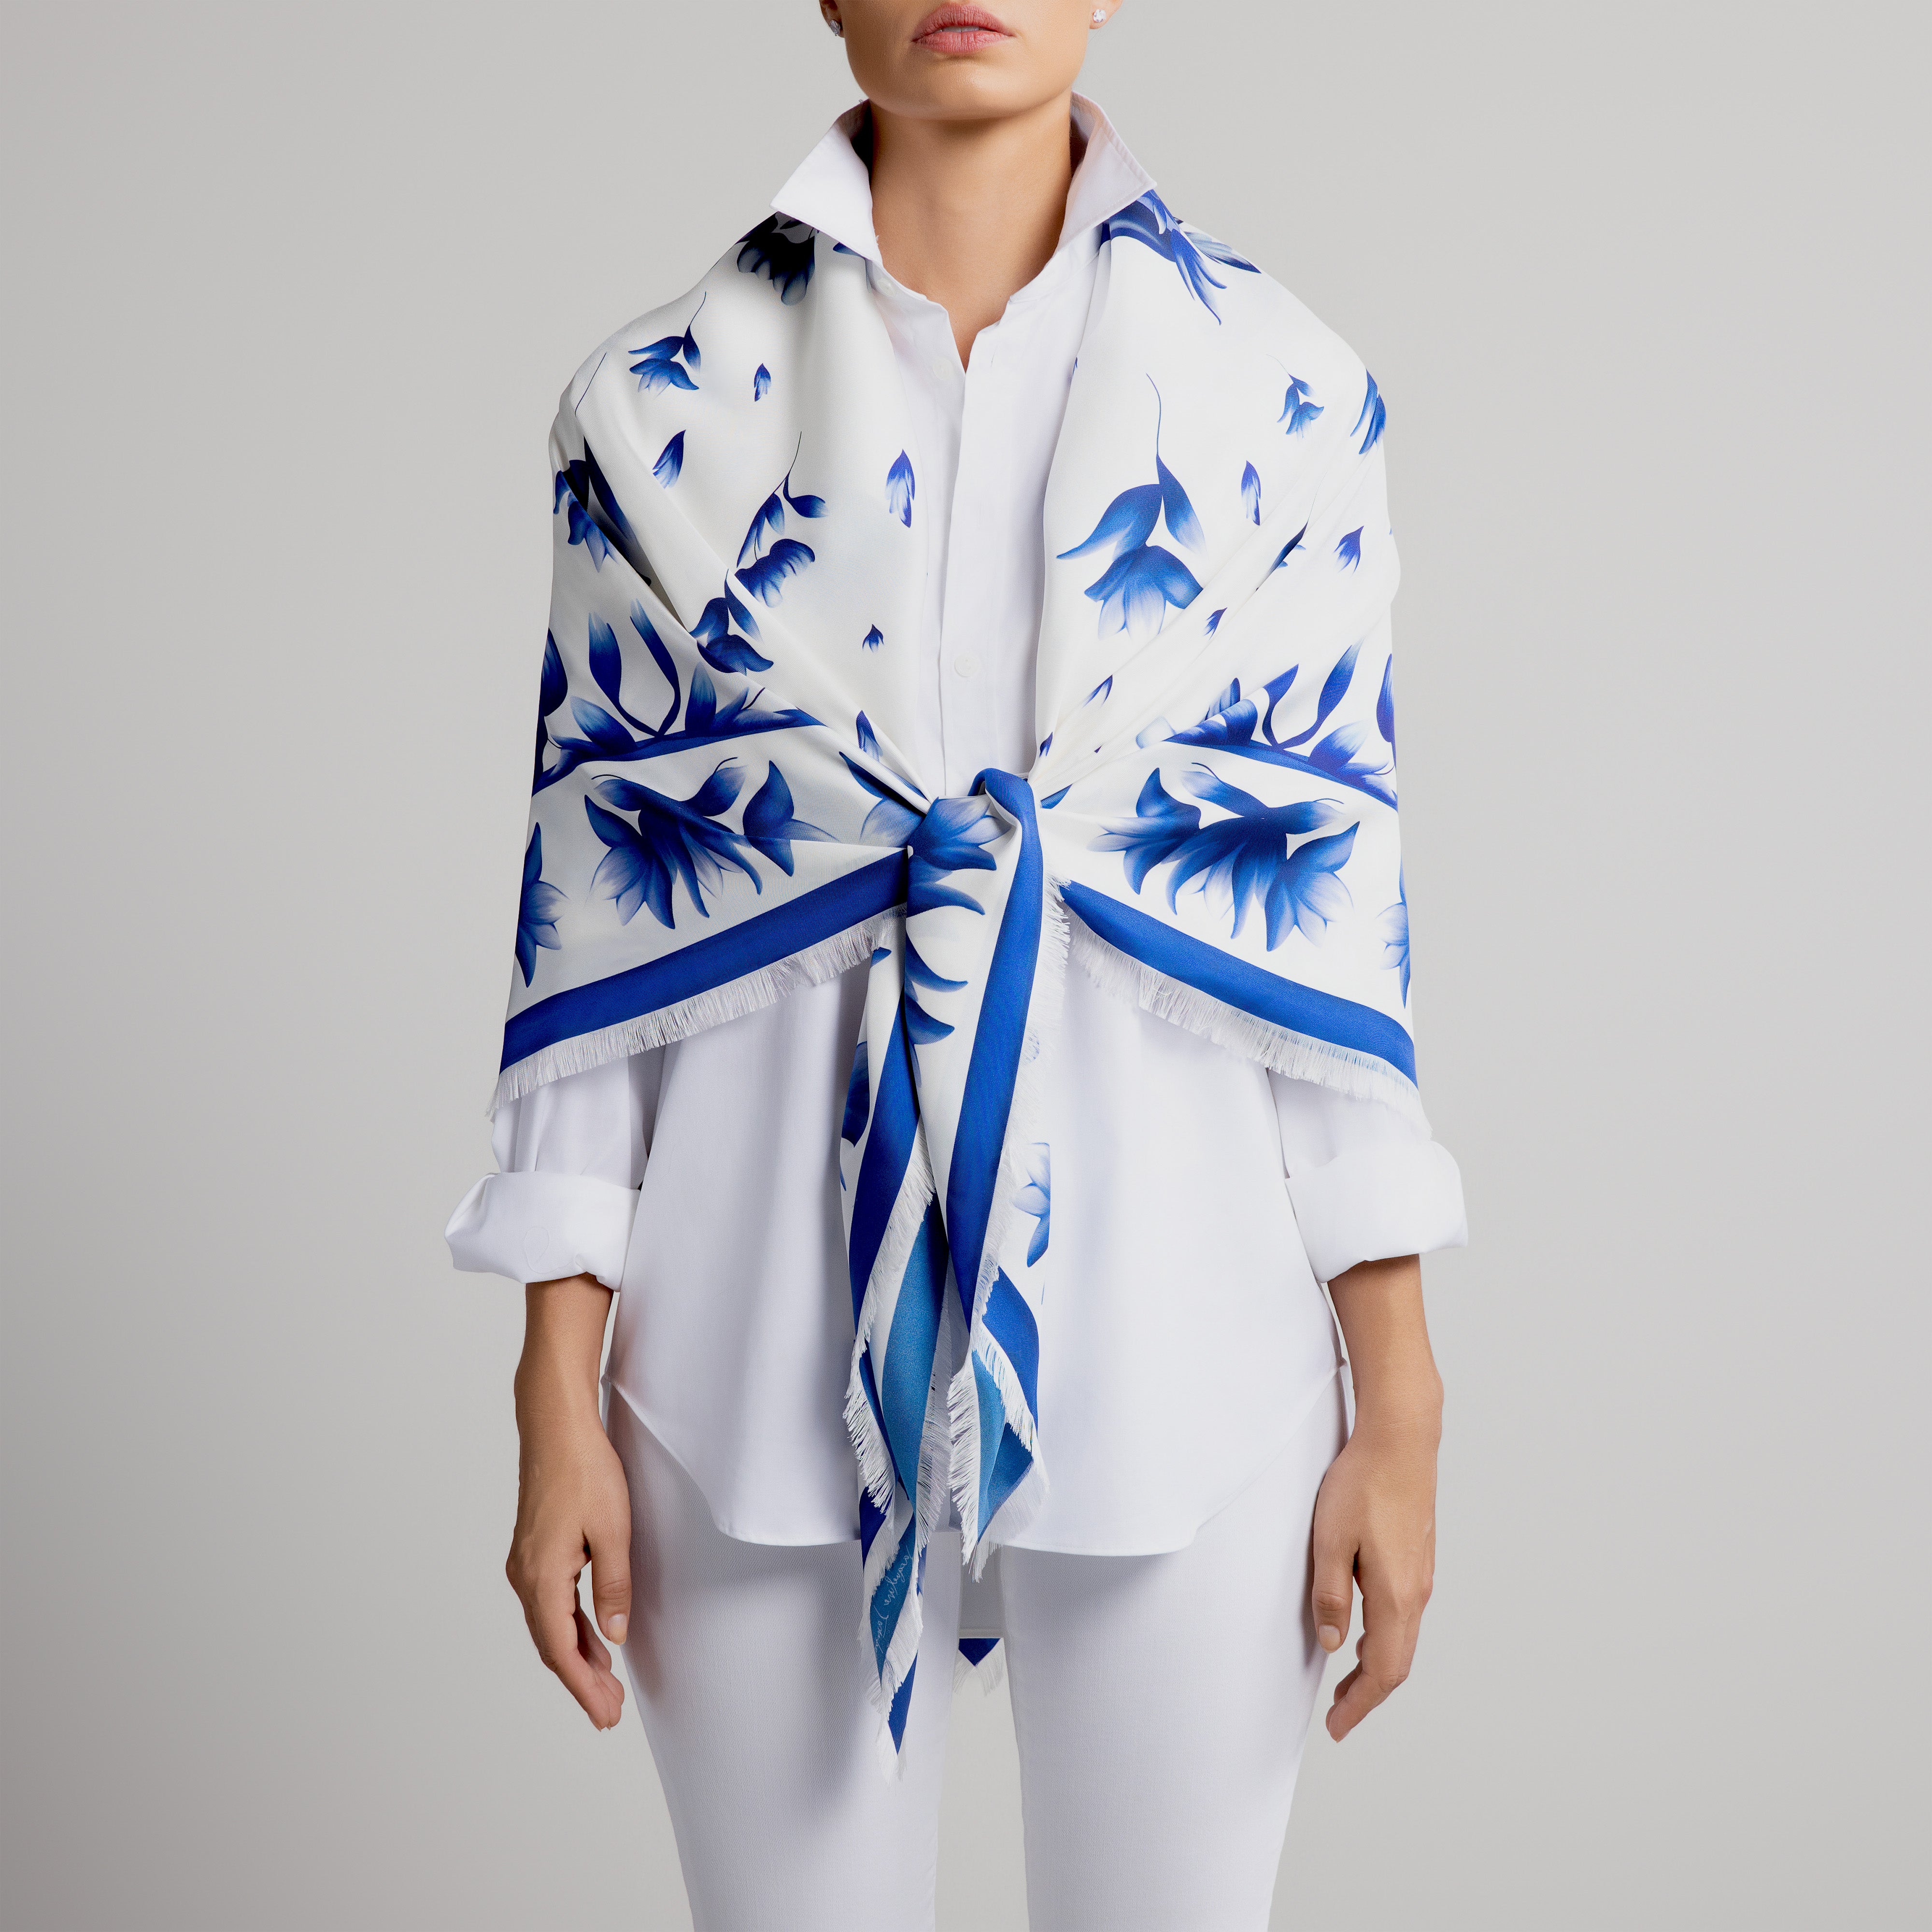 Azul Grande Silk Scarf in White with Hand-Feathered Edges